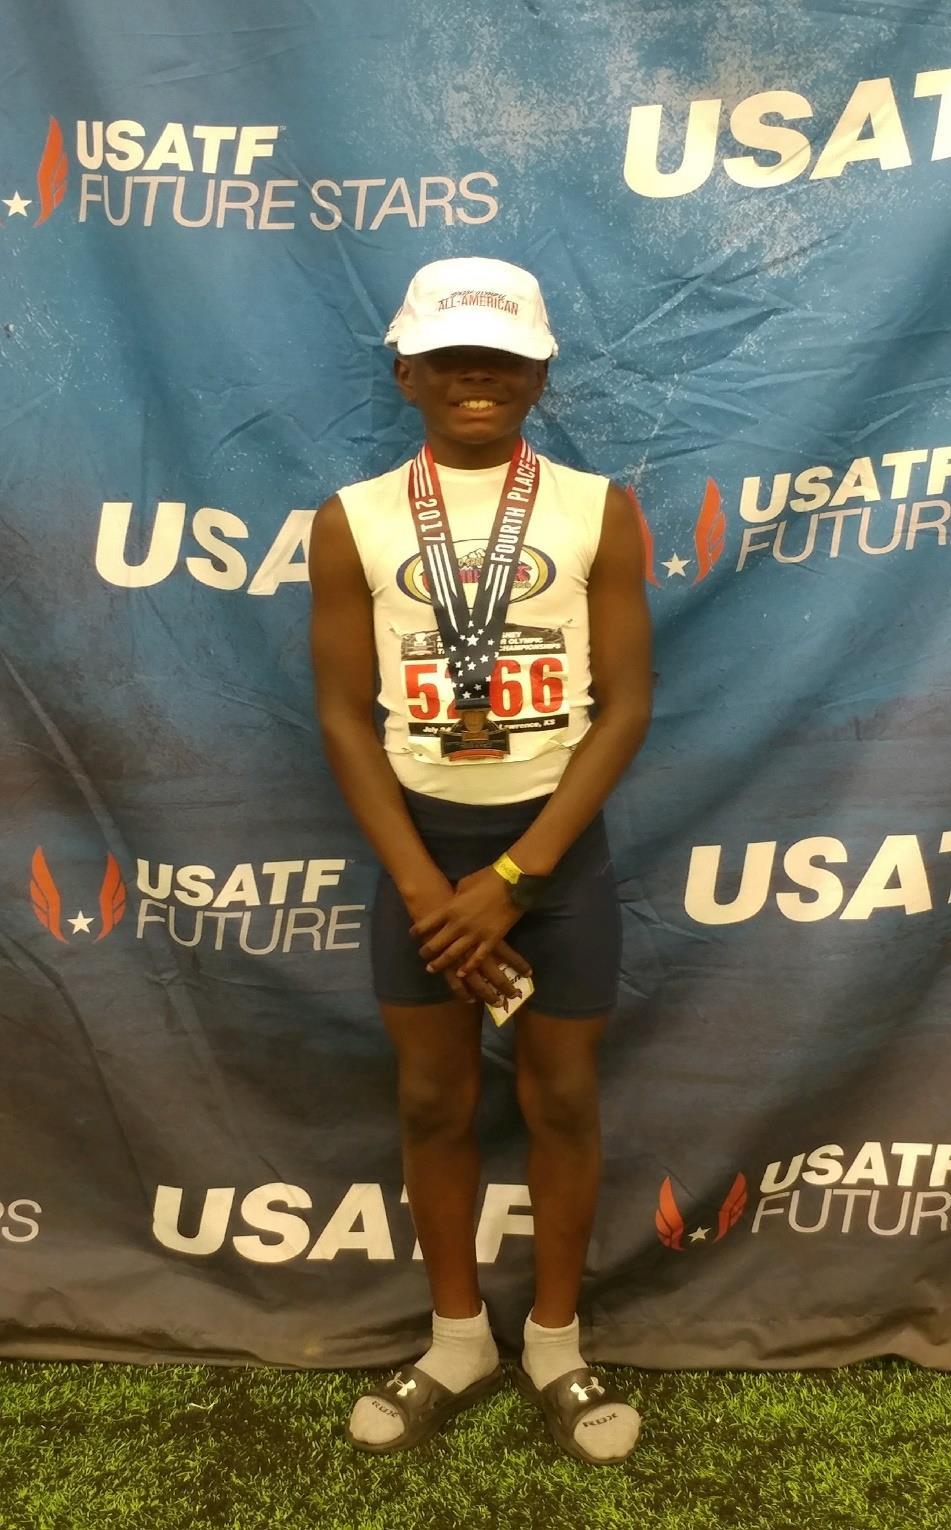 Brandon Hills won the 11-12 boy s 4 th place medal with